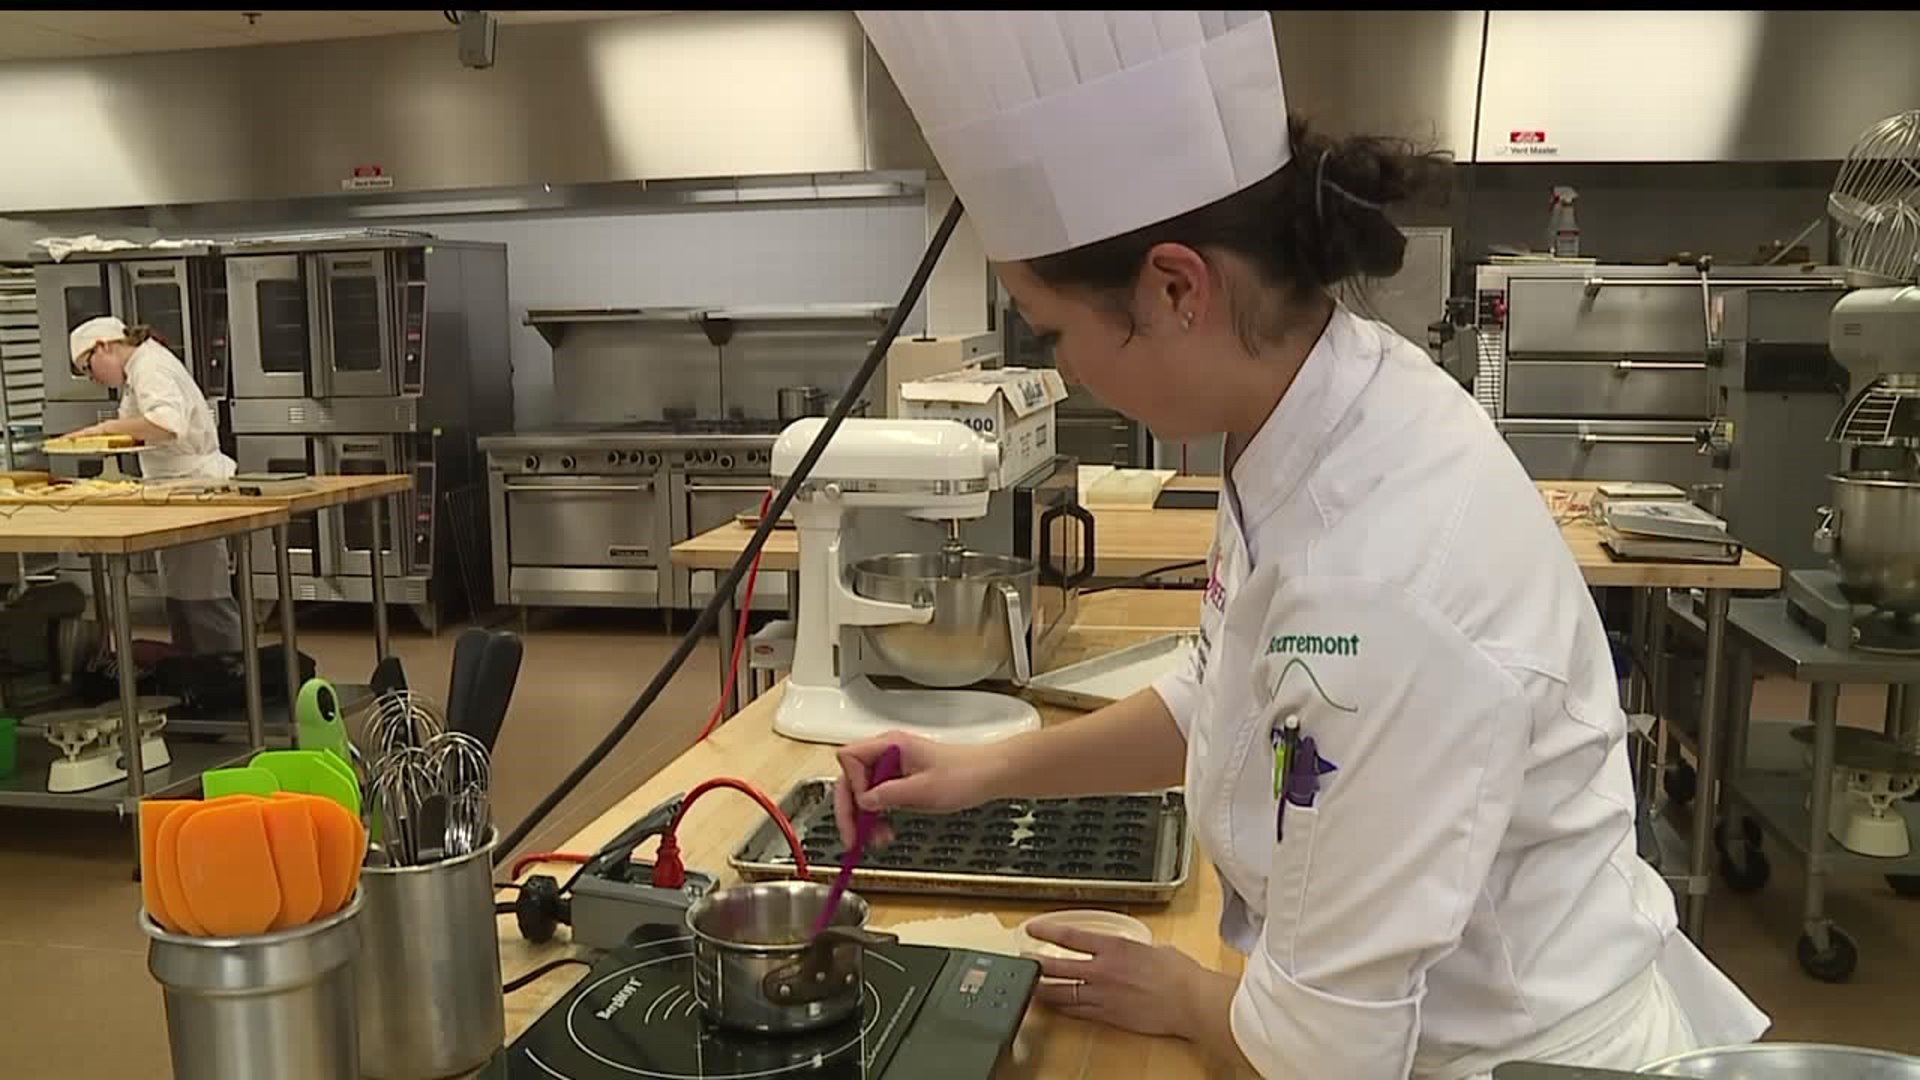 Local chef is head to the 2018 Ladies World Pastry Championship